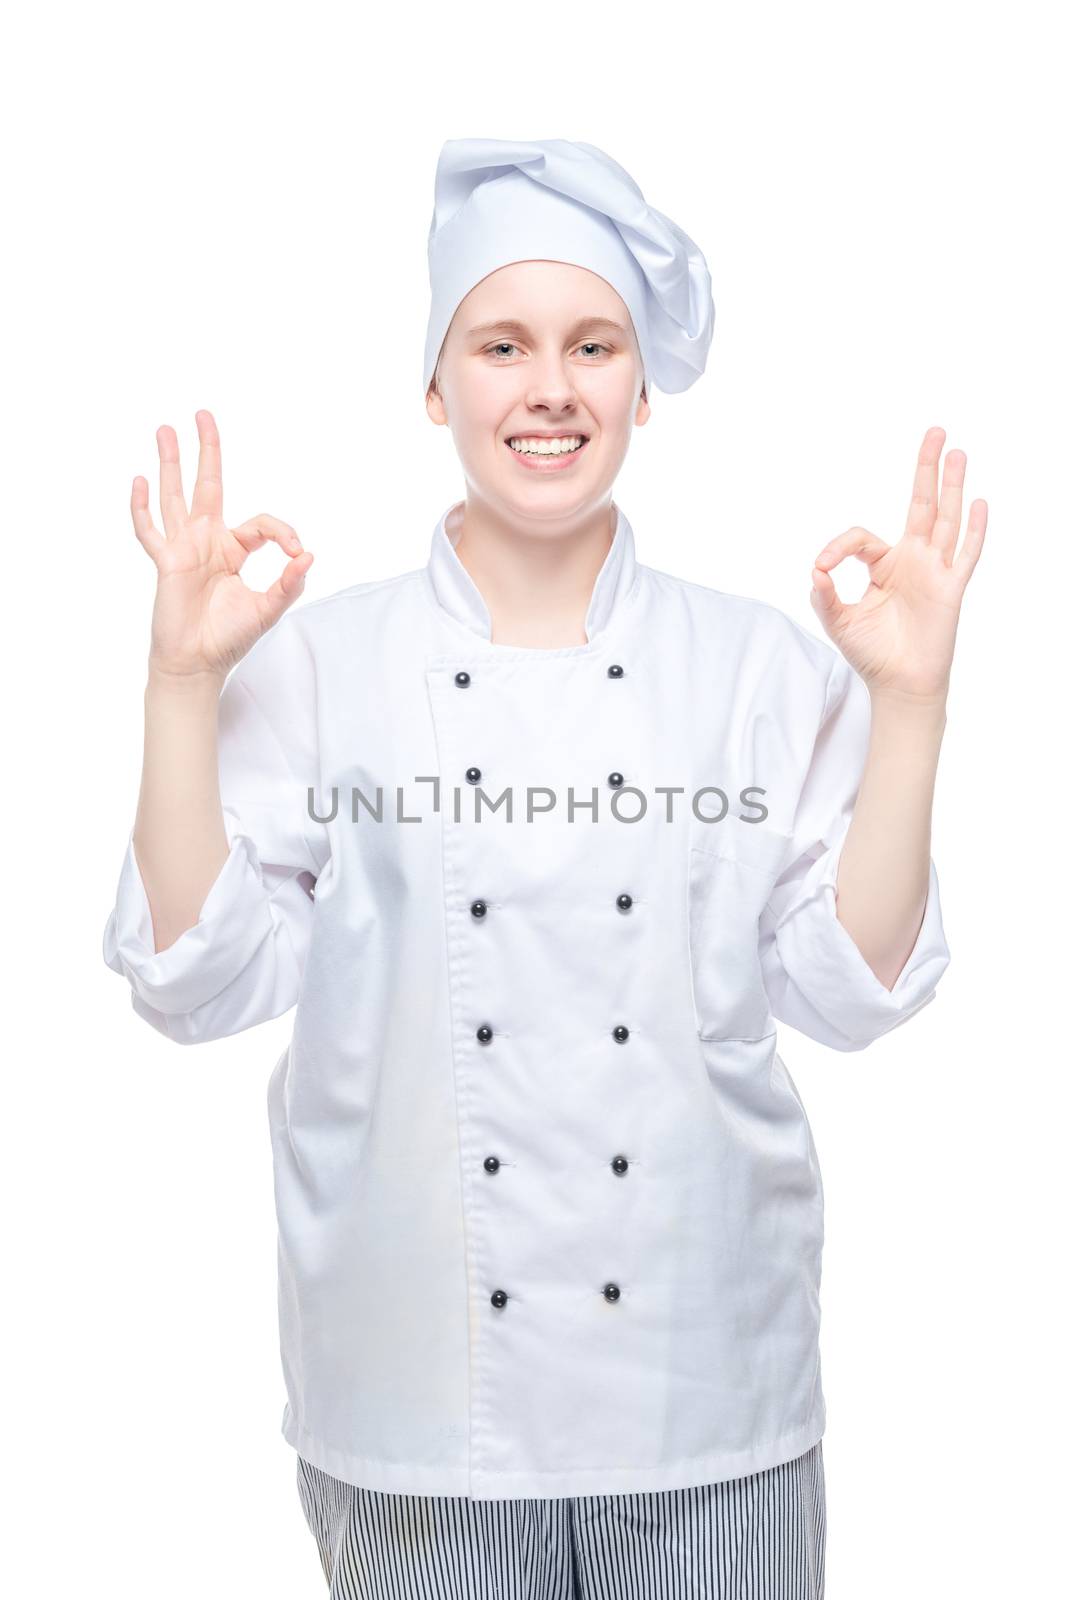 everything is OK - chef shooting on a white background, hand gestures